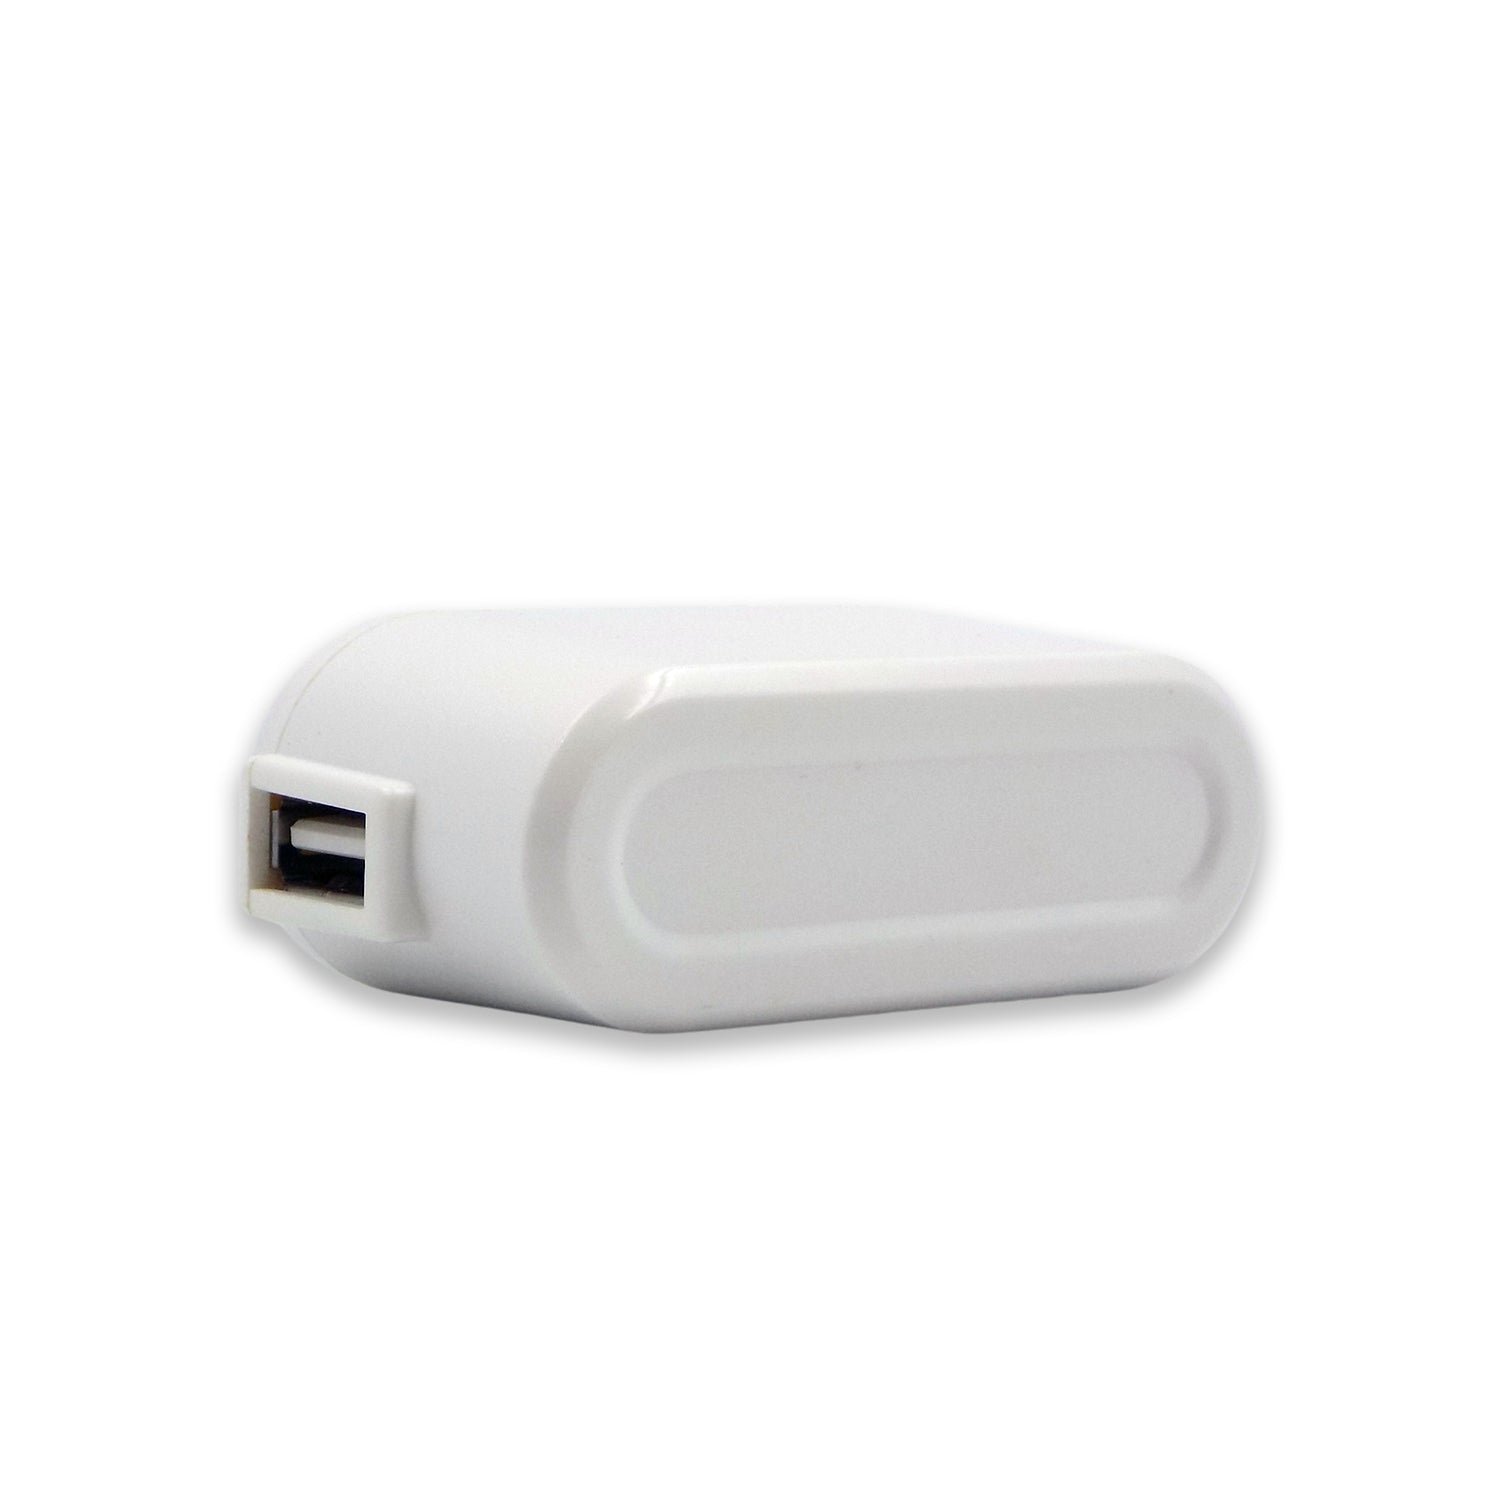 7392 Android Smartphone Charger, Travel Charger, Usb Charger (USB Cable Not Included)